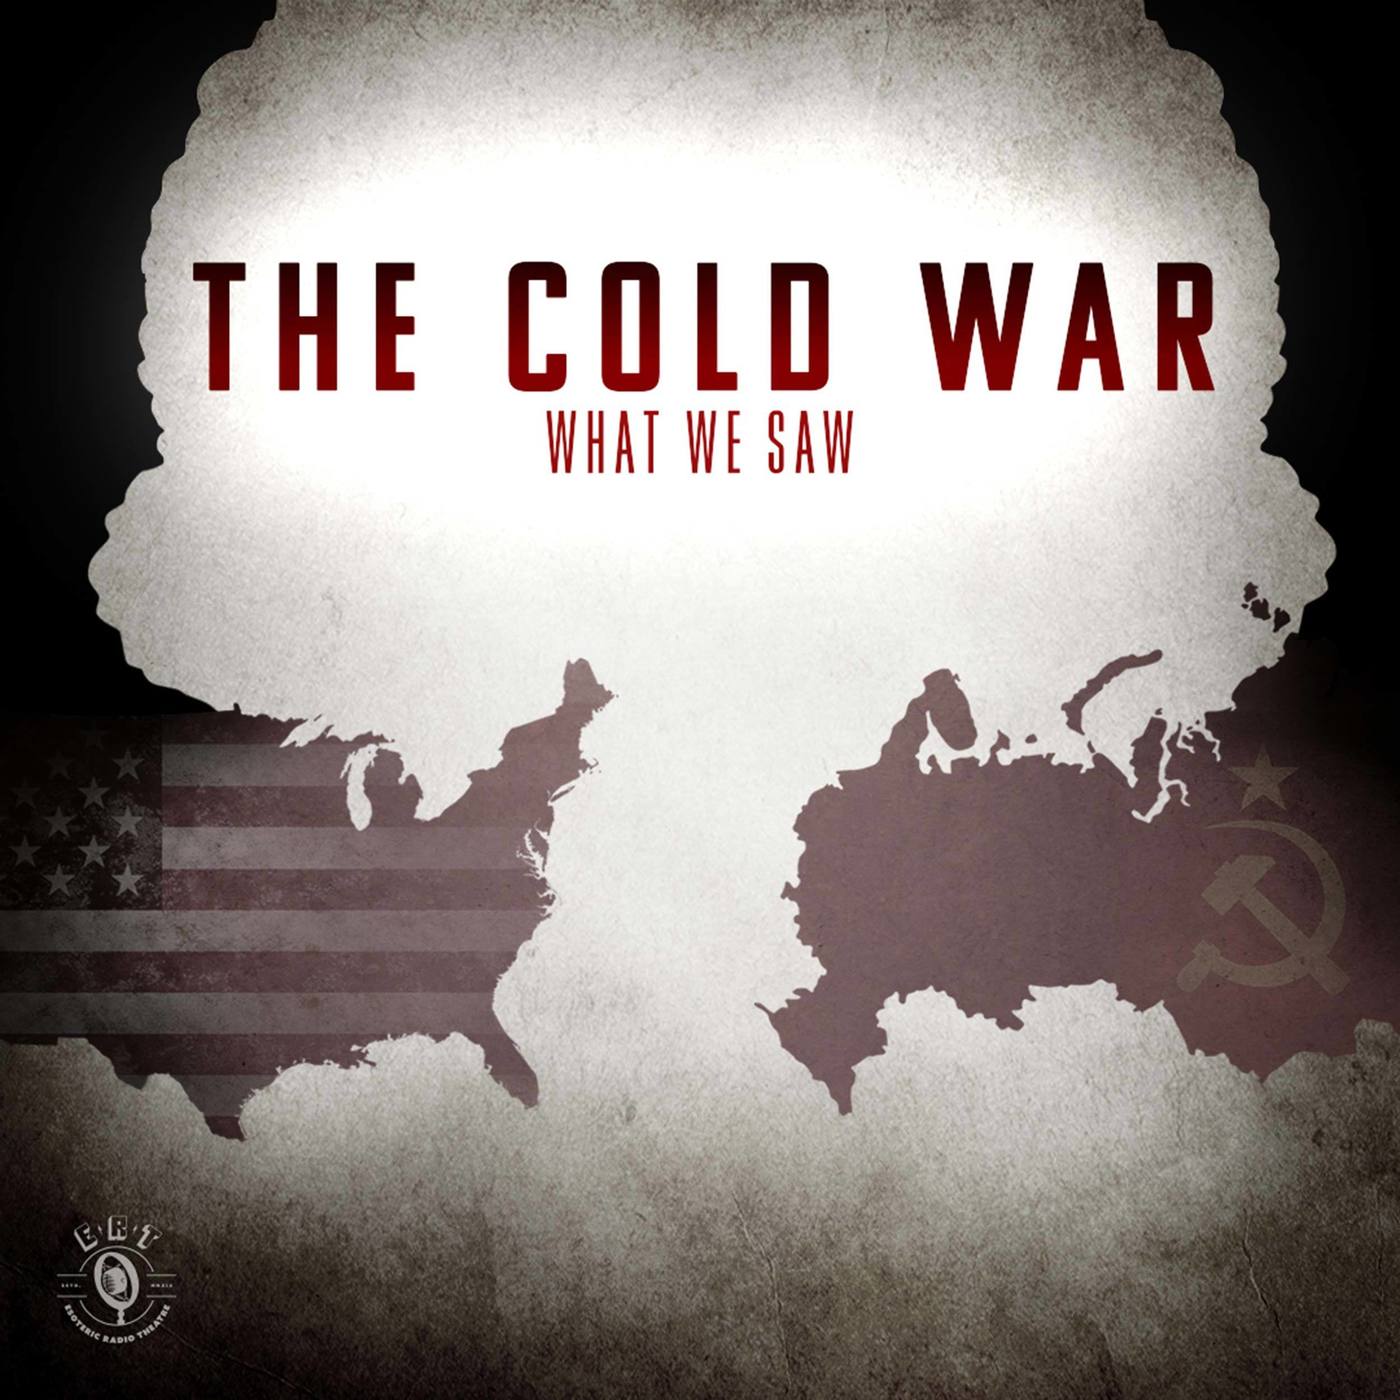 Bill Whittle: “The Cold War: What We Saw” – Episodes 3, 4 and 5